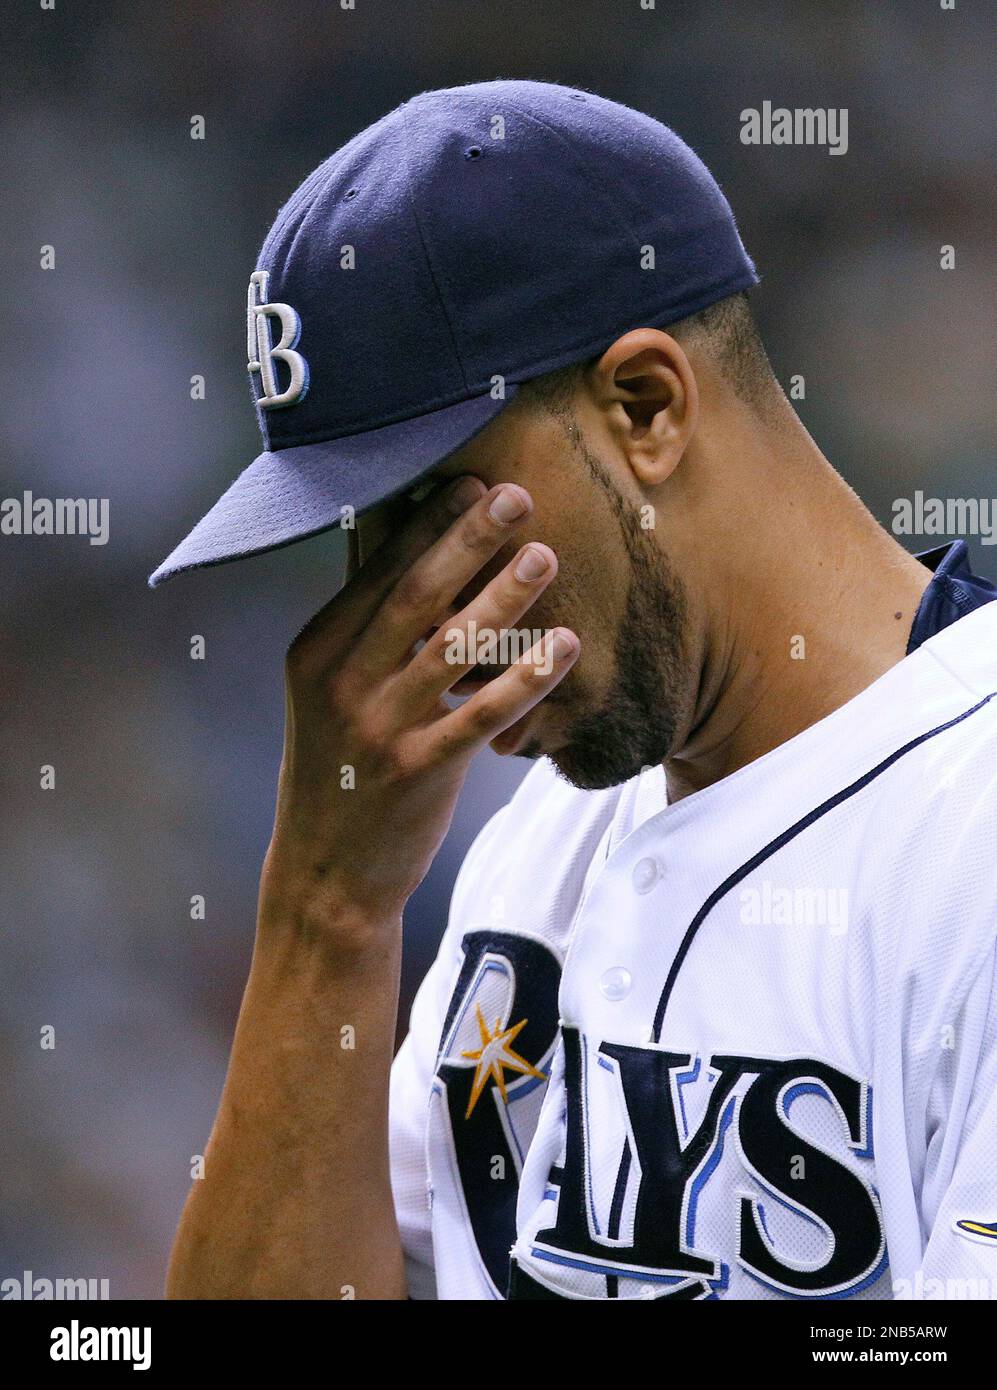 Tampa Bay Rays starting pitcher David Price wipes his eyes after